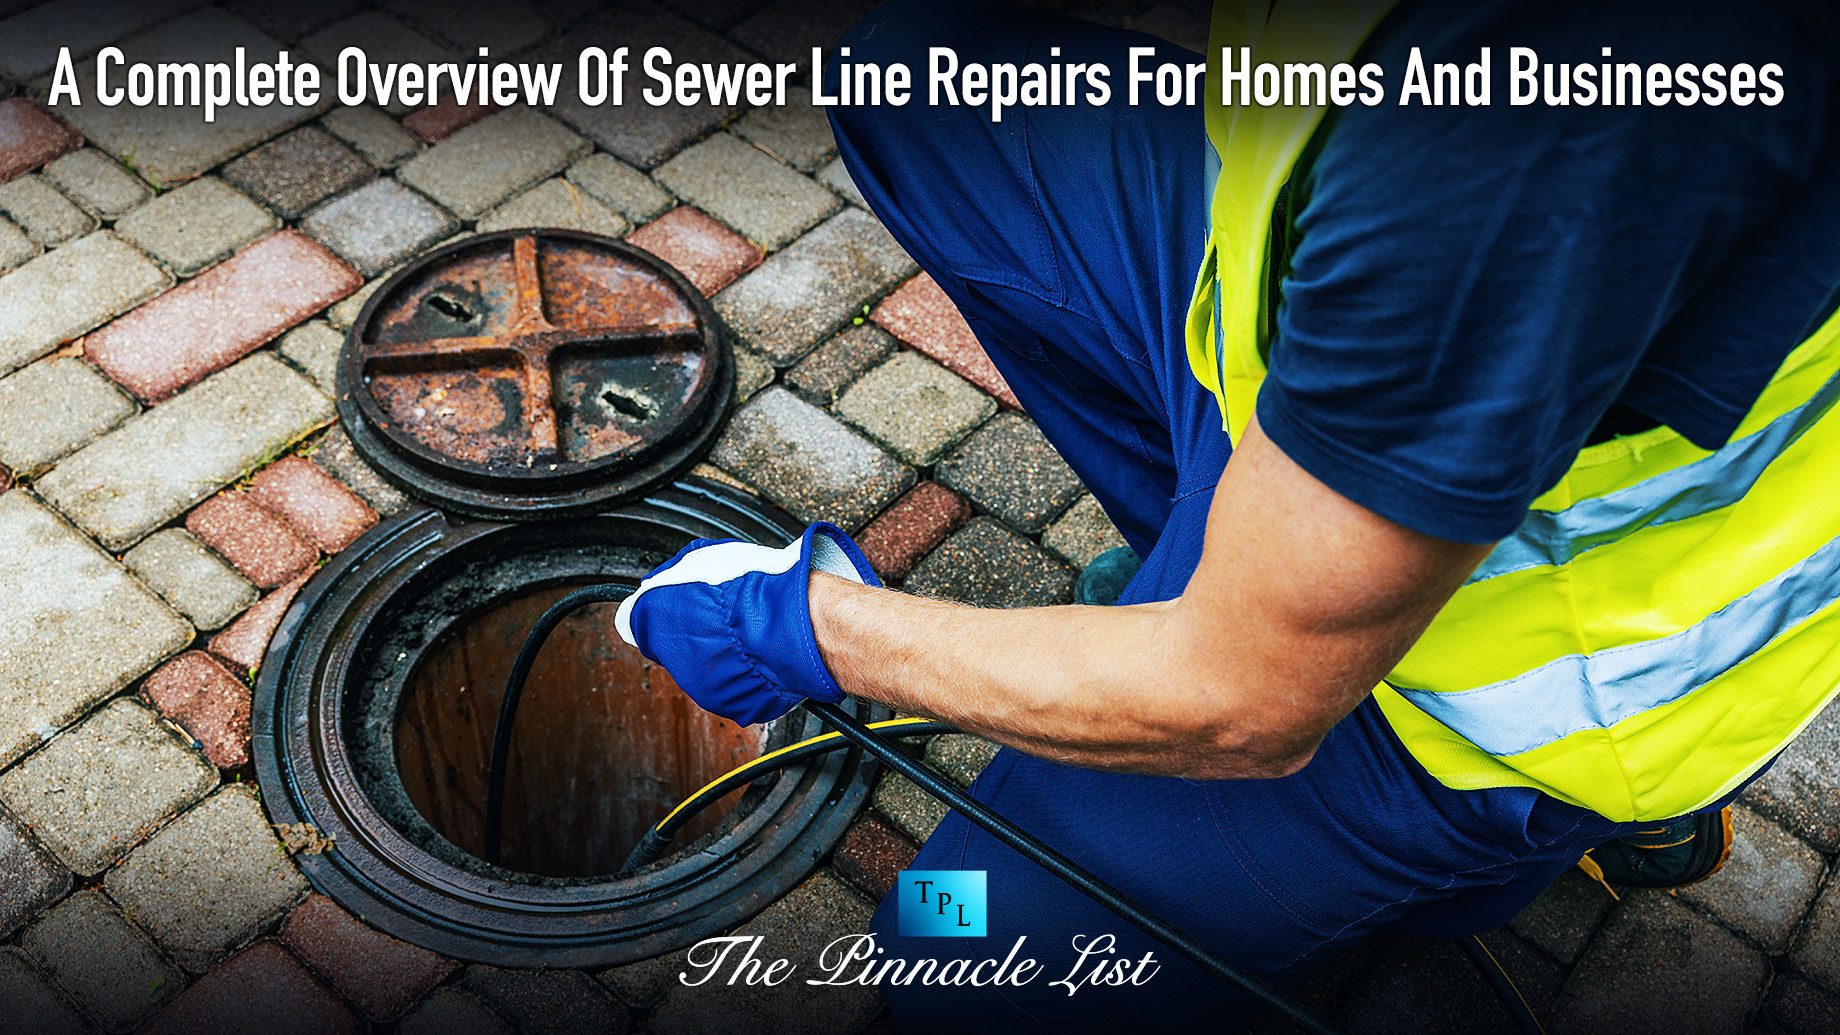 A Complete Overview Of Sewer Line Repairs For Homes And Businesses